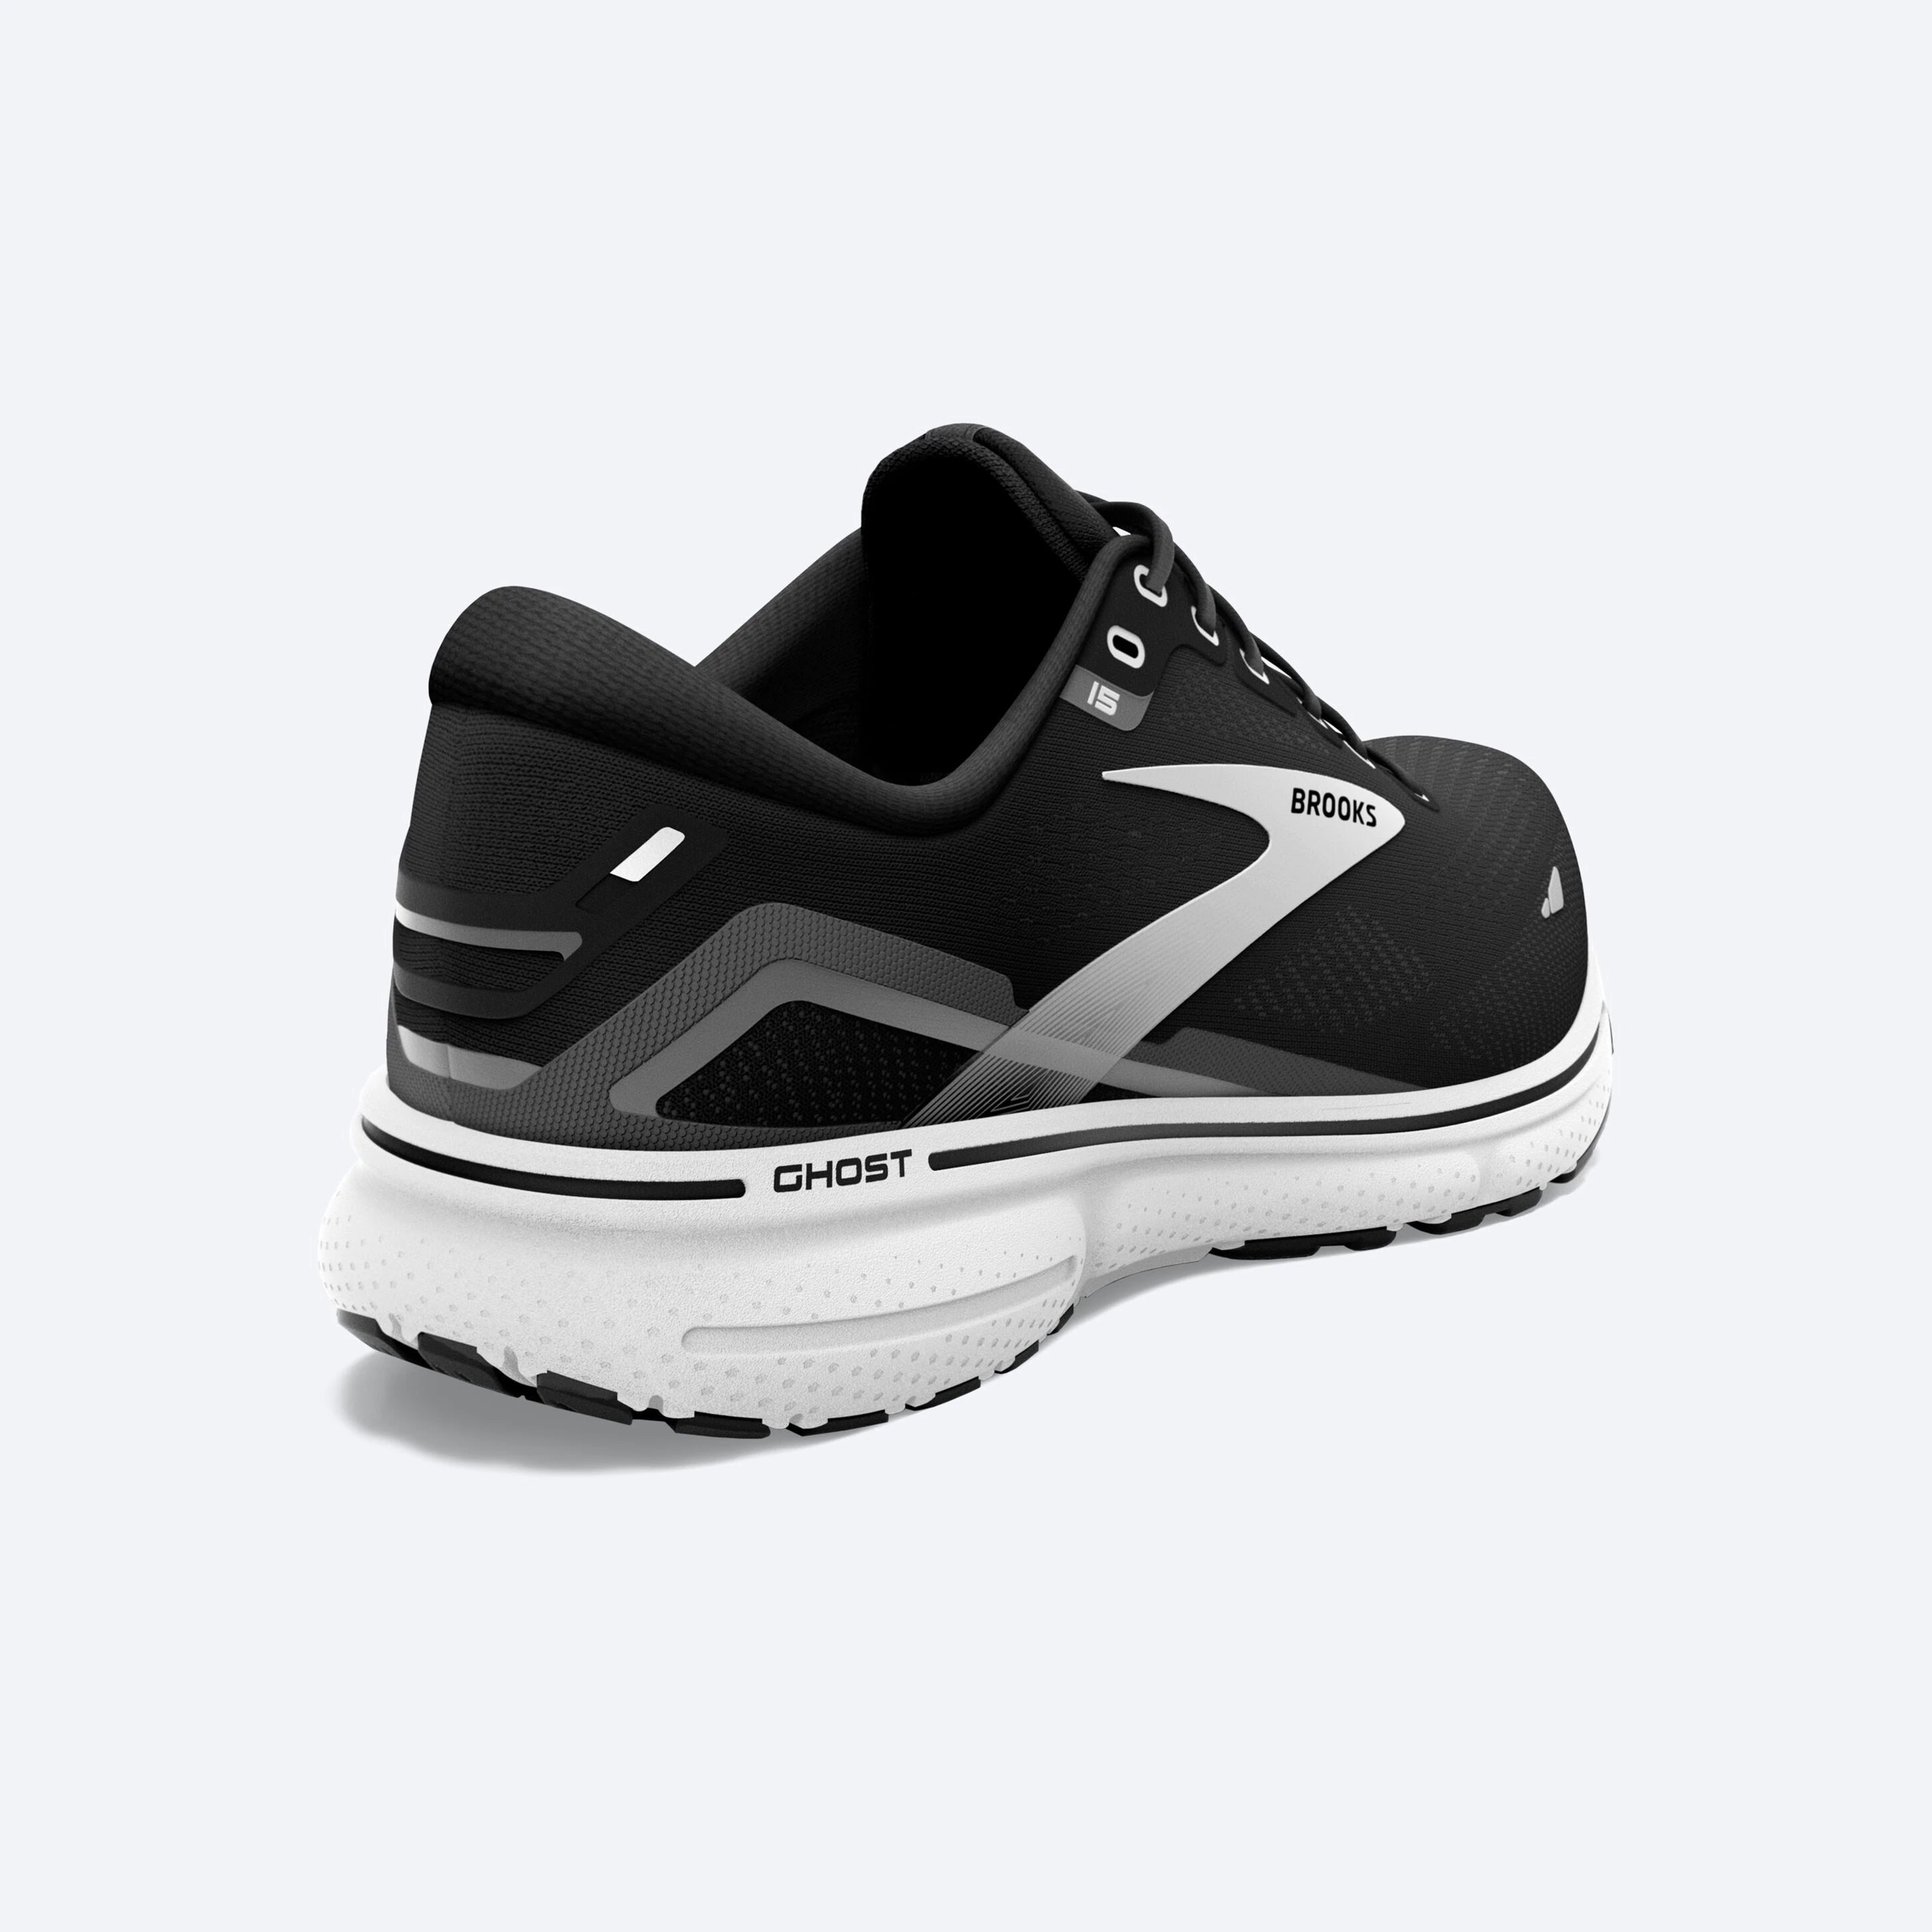 Back angle view of the Women's Ghost 15 by Brooks in the wide D width, color Black/BlackenedPearl/White